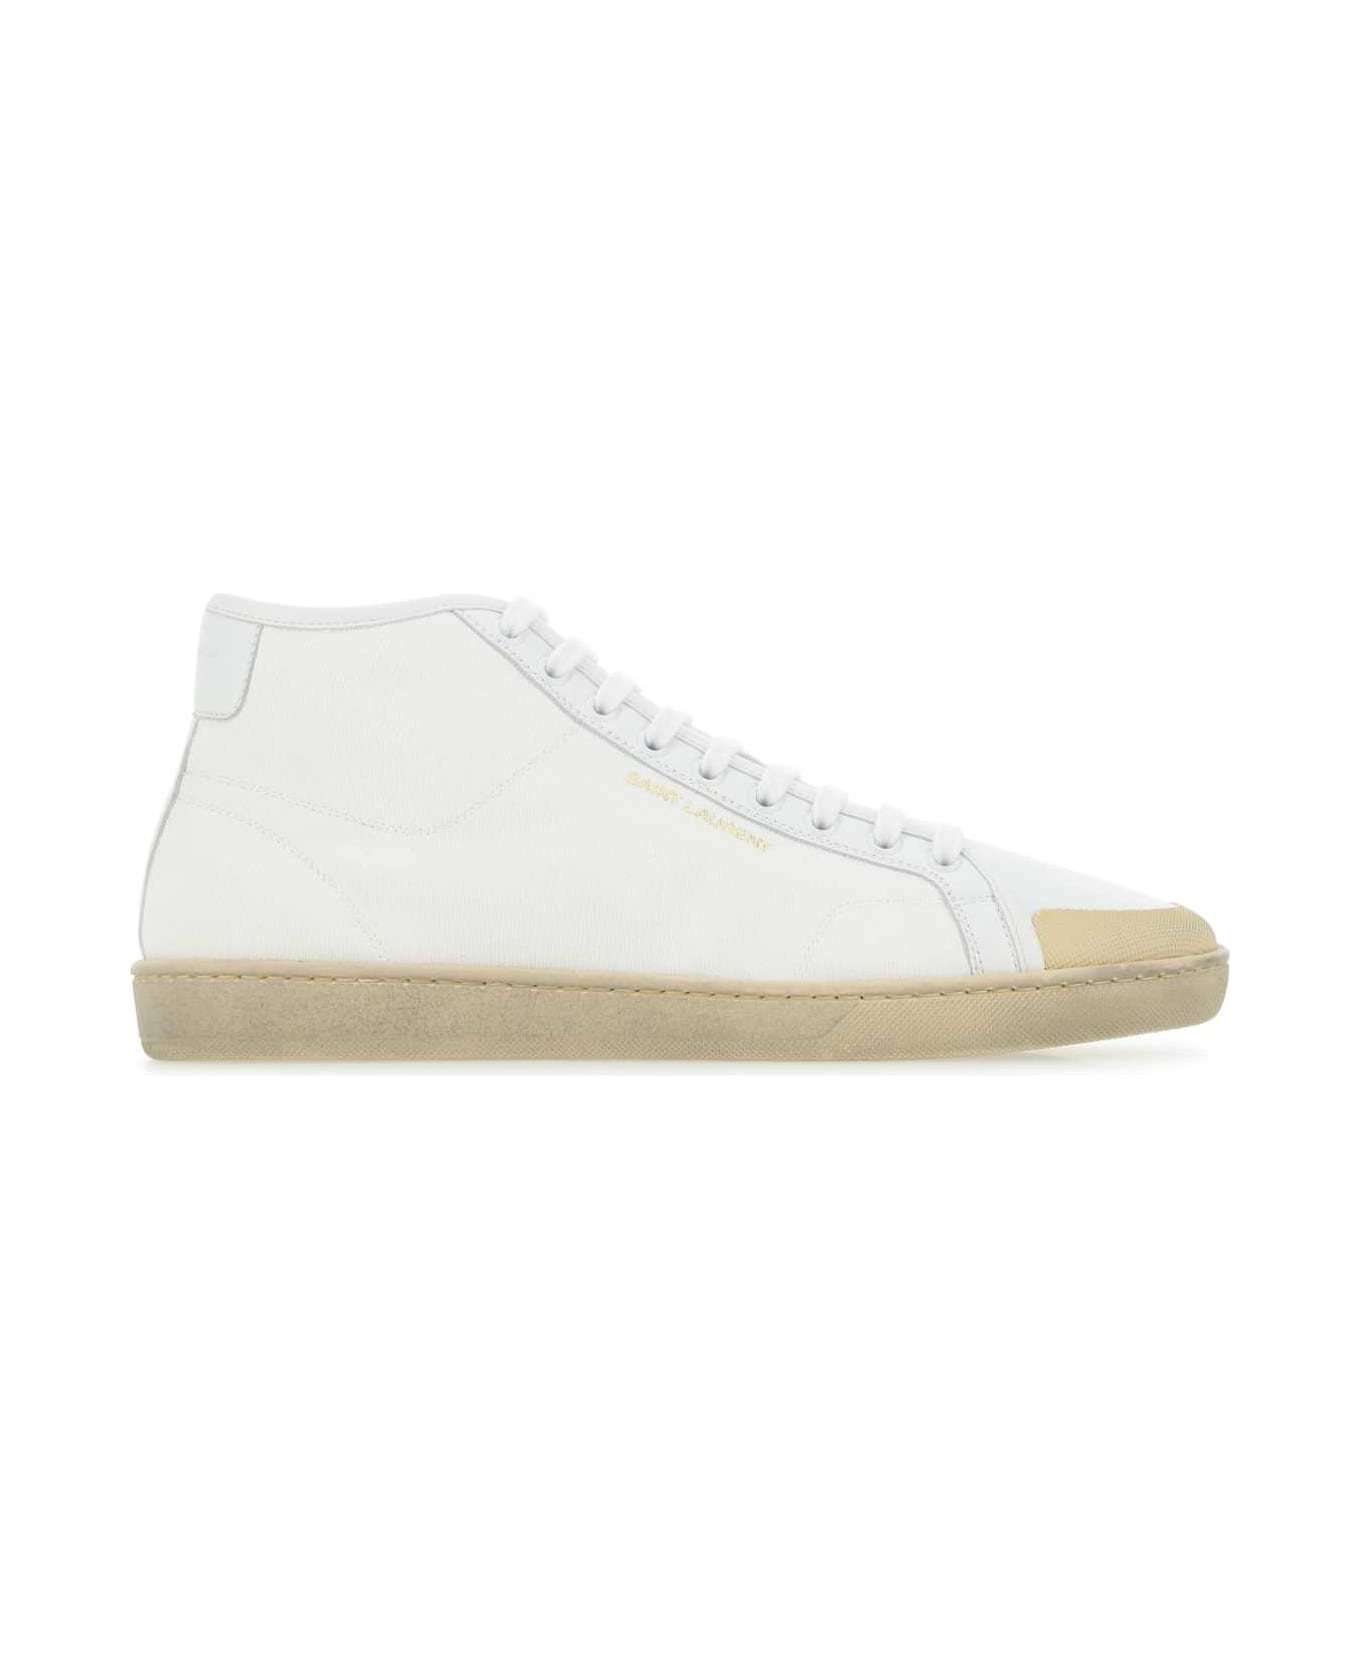 Saint Laurent White Canvas And Leather Court Classic Sl/39 Sneakers - 9026 スニーカー